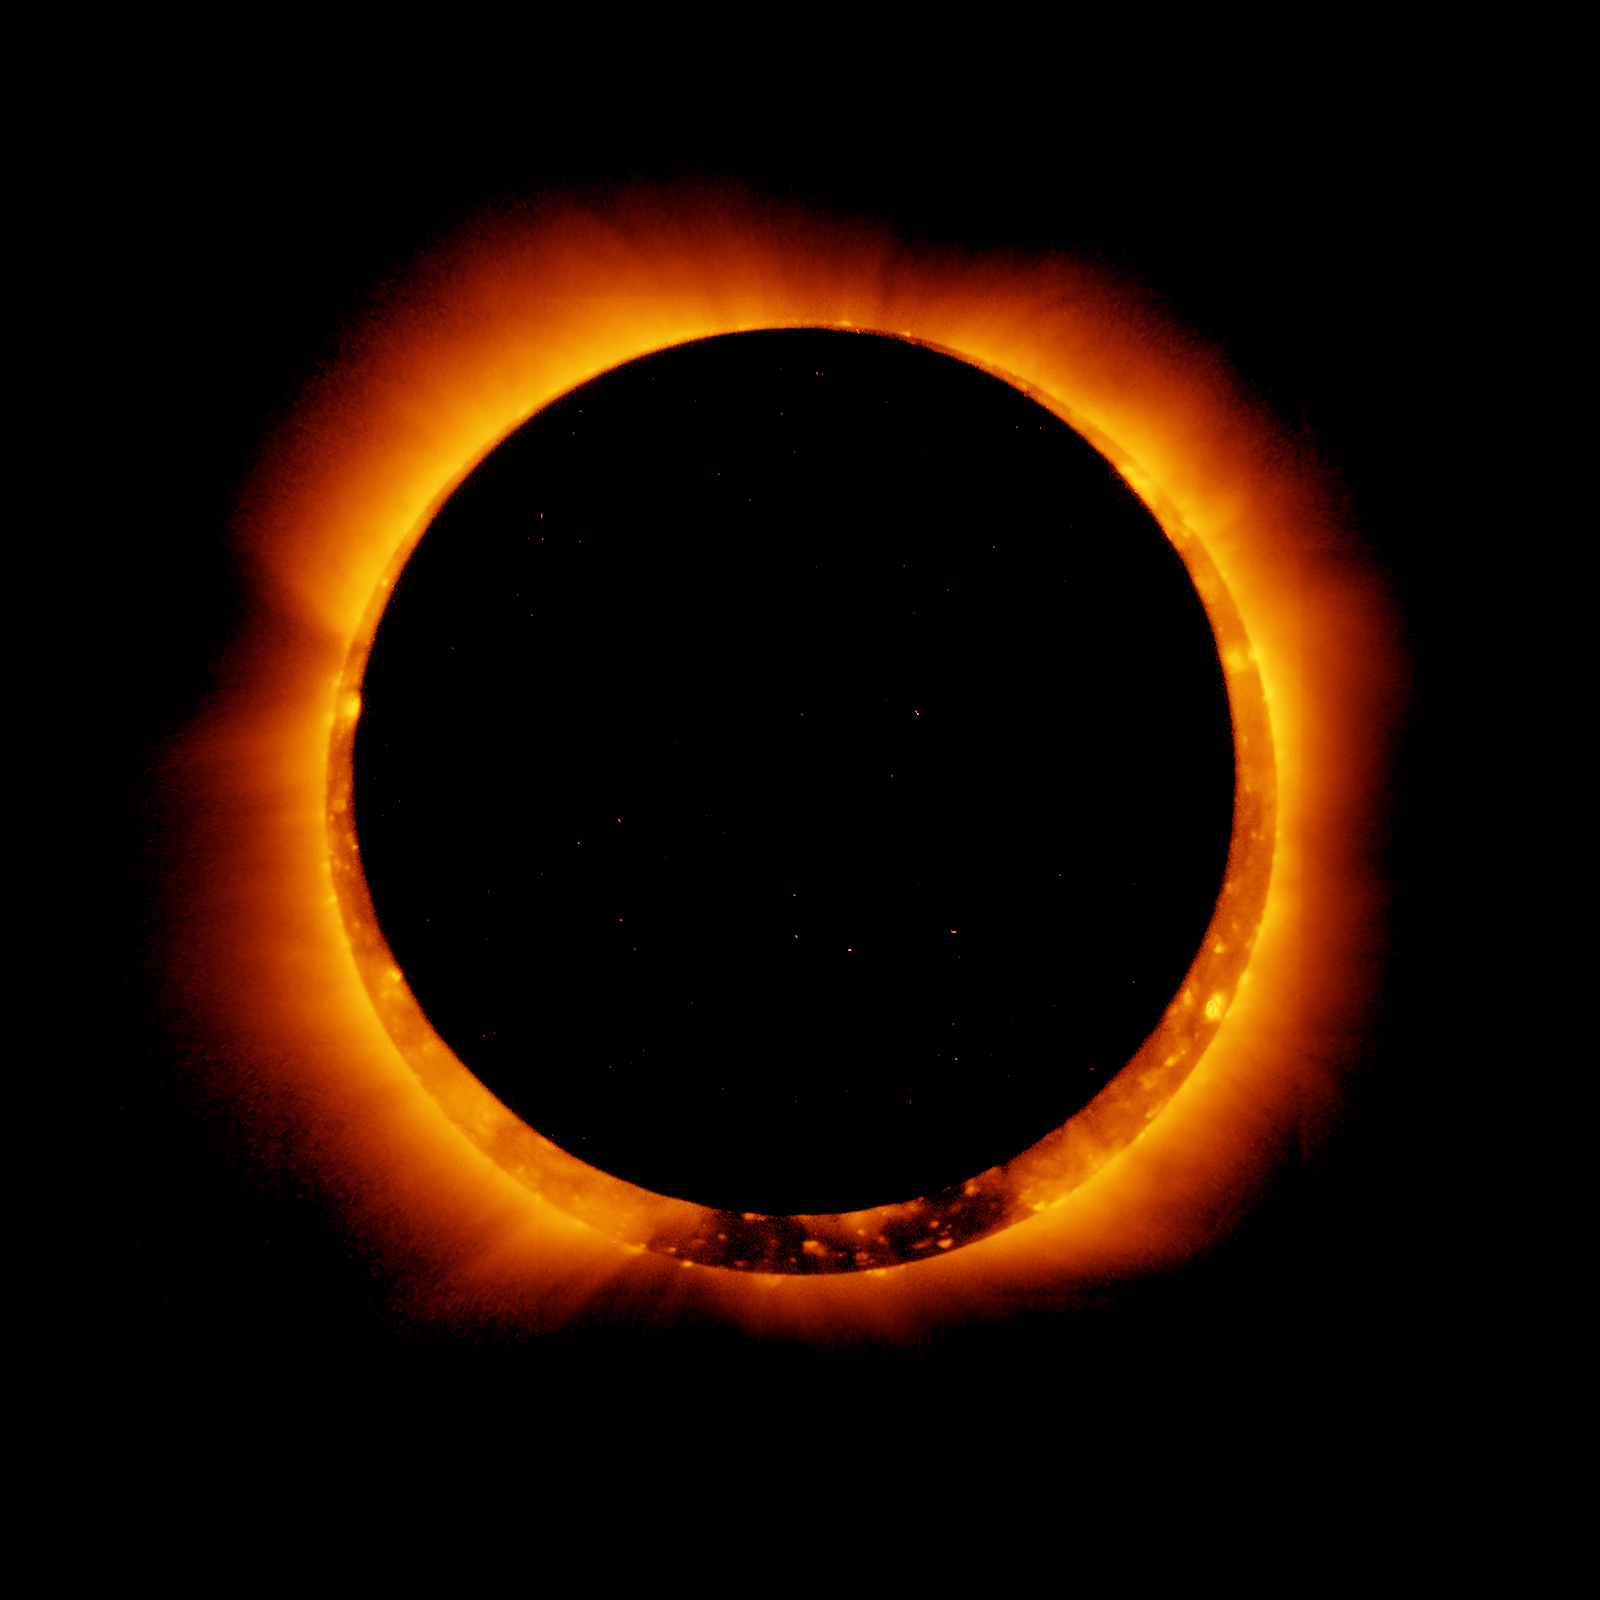 Solar eclipse with the light of the sun forming a border around the edge of the darkened moon